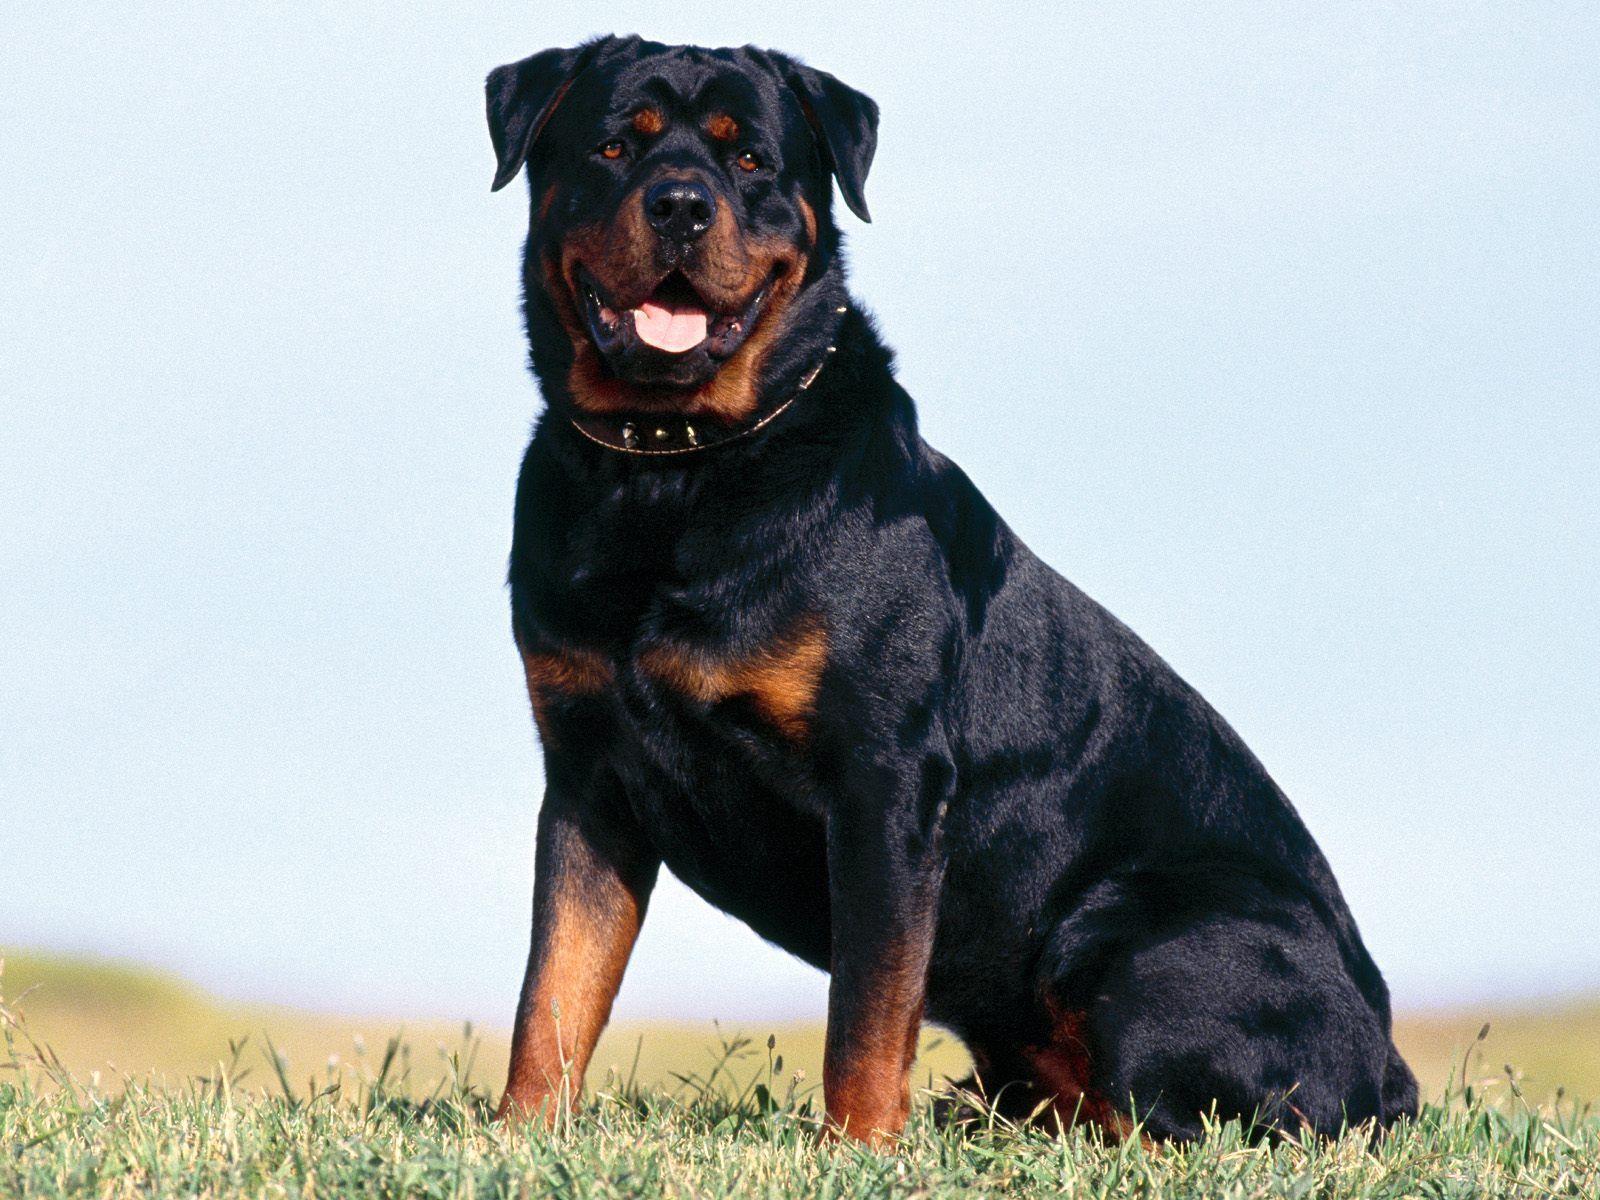 Rottweiler Dog Wallpaper Group , Download for free